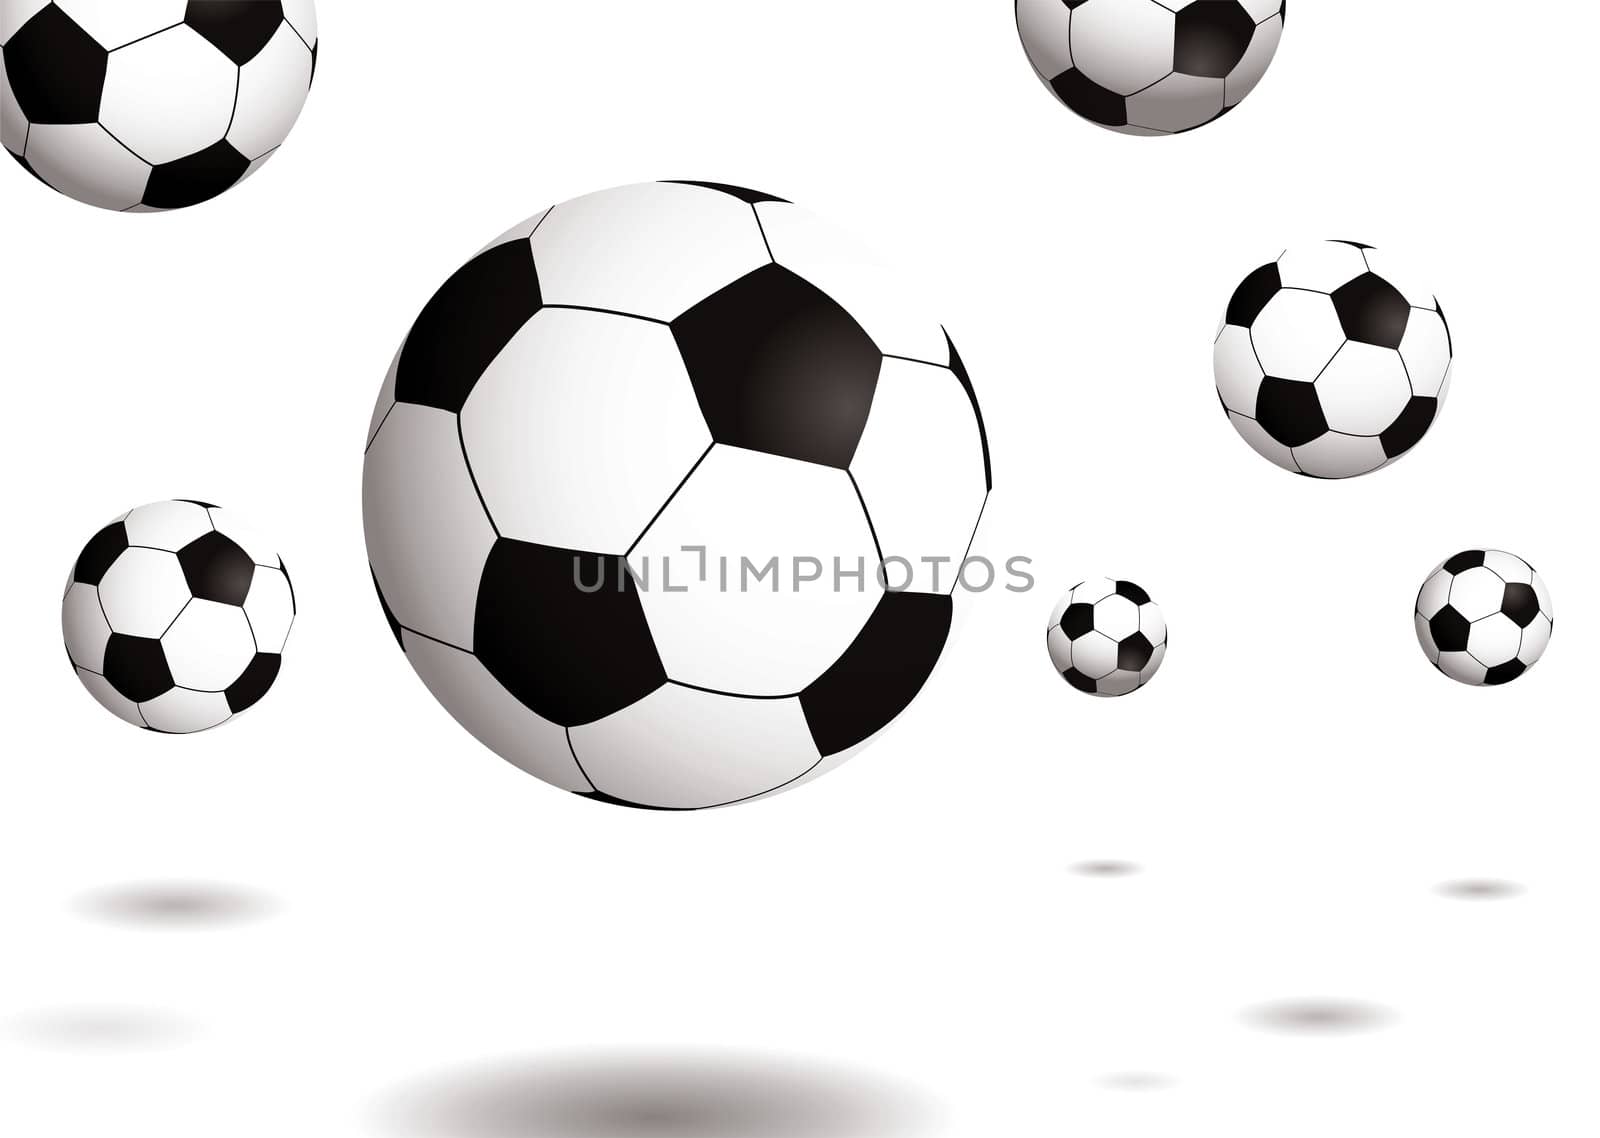 Collection of footballs bouncing on a plain white background